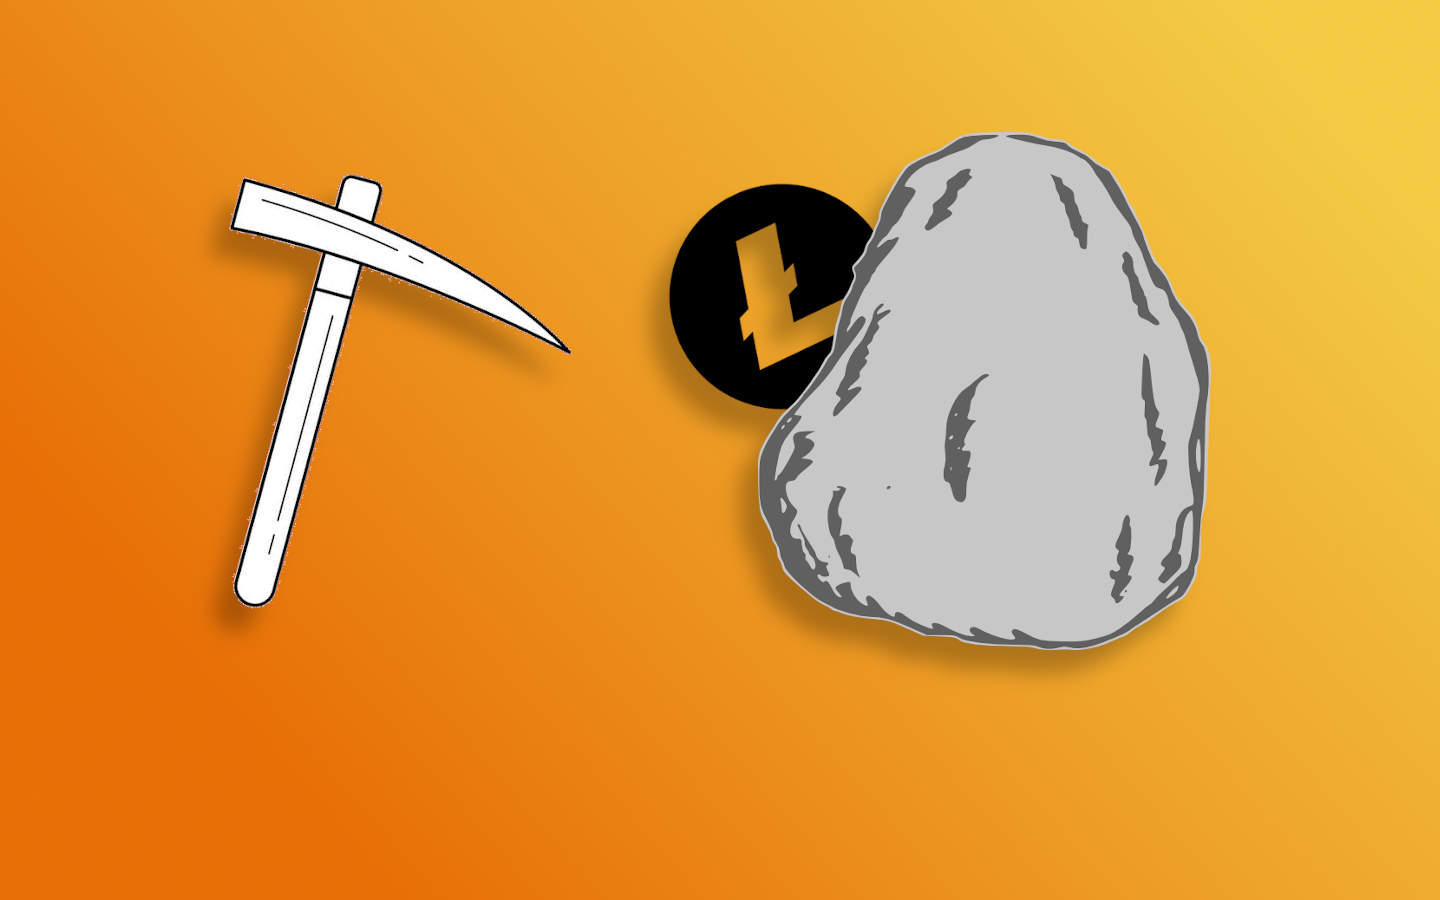 A clipart pickaxe swinging at a rock filled with Litecoin